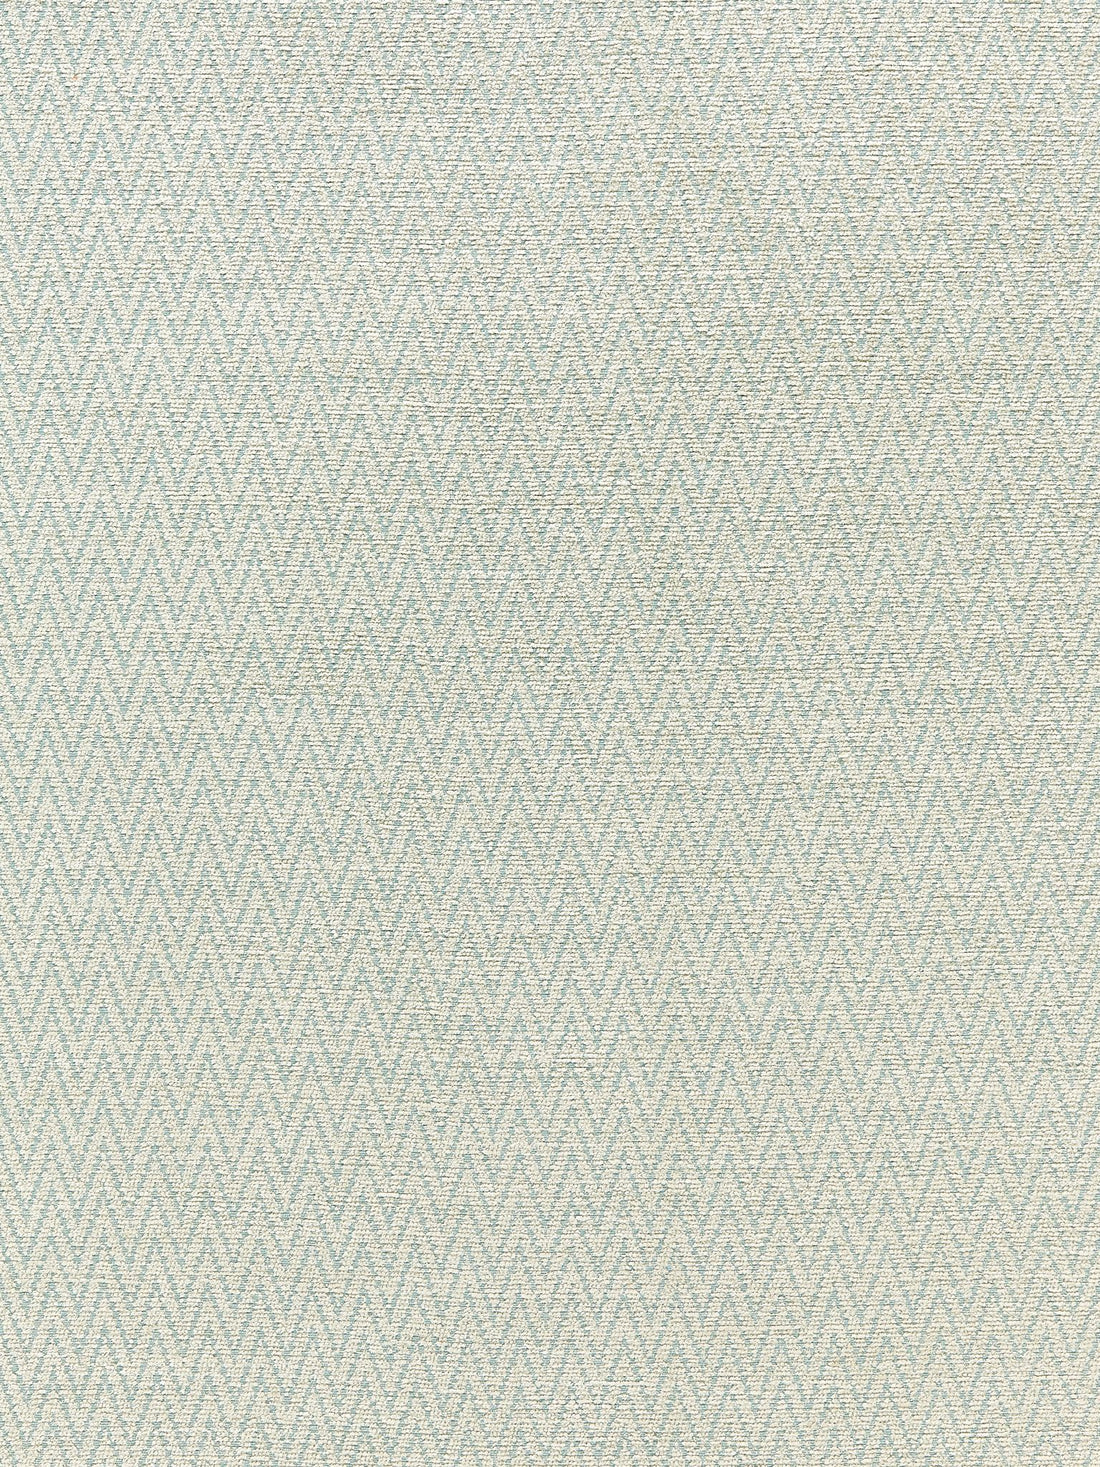 Chevron Chenille fabric in mineral color - pattern number BK 0002K65116 - by Scalamandre in the Old World Weavers collection